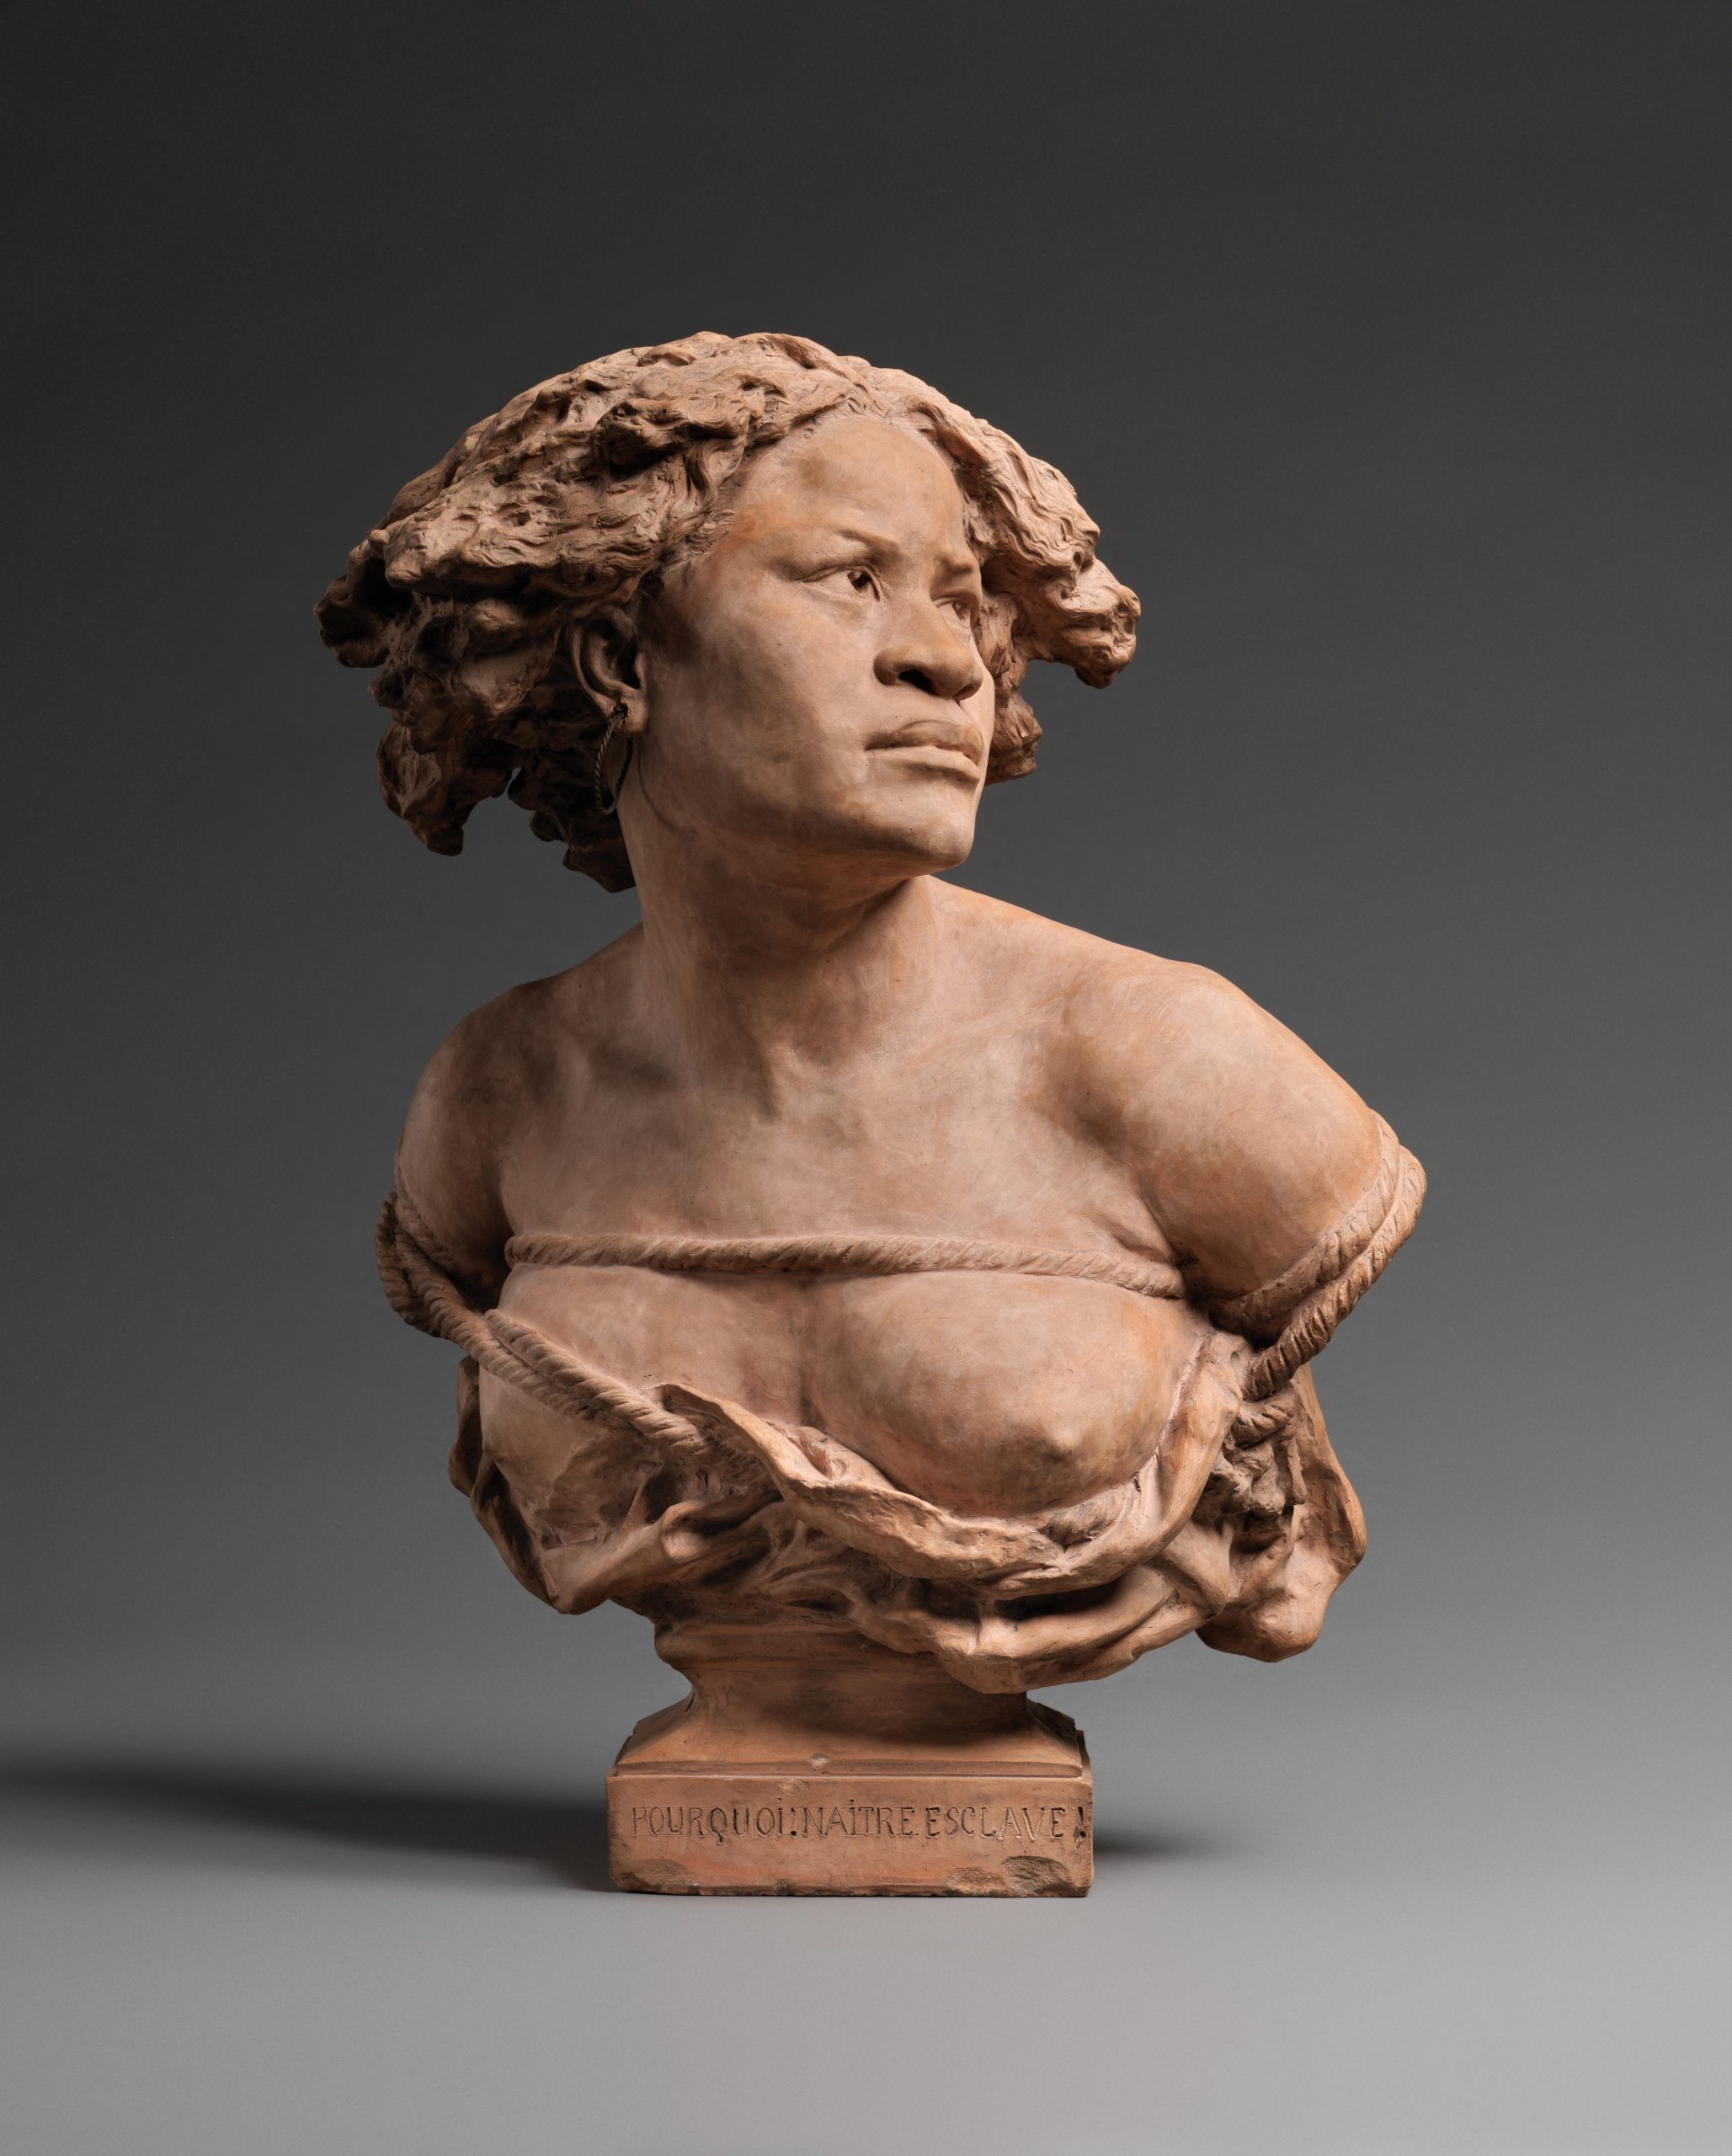 A statue of the bodice of a young bare-chested woman who gazes in the distance.